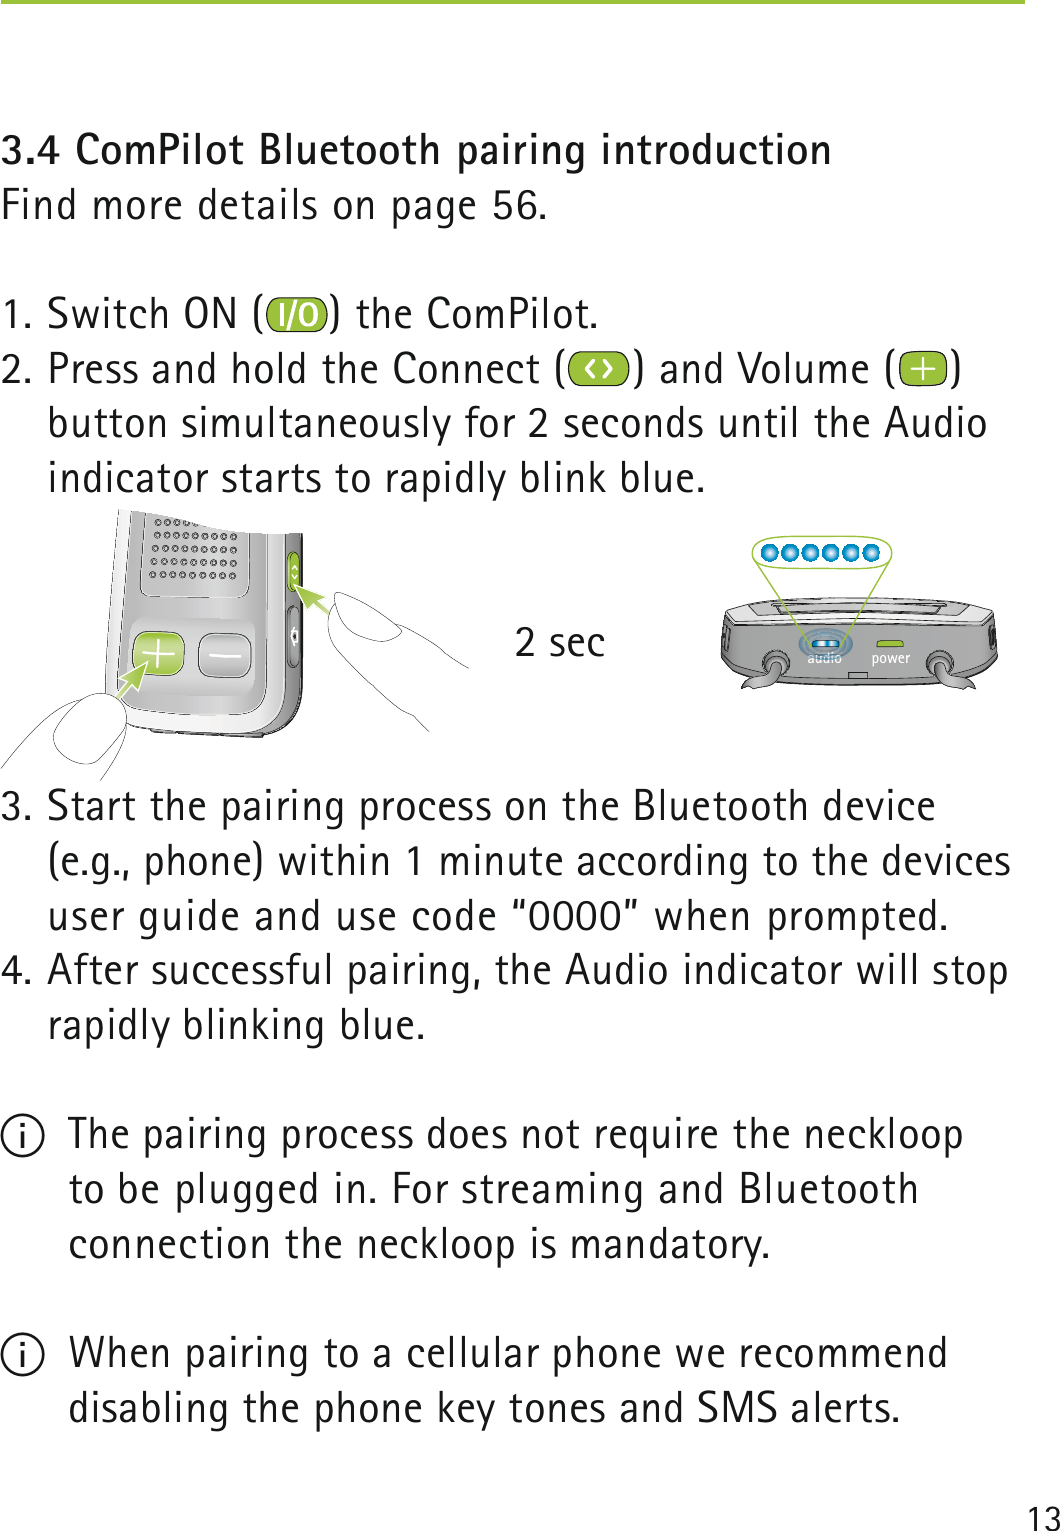 133.4 ComPilot Bluetooth pairing introduction  Find more details on page 56.1. Switch ON ( ) the ComPilot.2. Press and hold the Connect ( ) and Volume ( ) button simultaneously for 2 seconds until the Audio indicator starts to rapidly blink blue.          2 sec3. Start the pairing process on the Bluetooth device (e.g., phone) within 1 minute according to the devices user guide and use code “0000” when prompted.4. After successful pairing, the Audio indicator will stop rapidly blinking blue.I  The pairing process does not require the neckloop  to be plugged in. For streaming and Bluetooth  connection the neckloop is mandatory.I  When pairing to a cellular phone we recommend disabling the phone key tones and SMS alerts.poweraudioauauauauauauauauuuauaudididididiidididididiidiooooooooooooudiididiiidiiidididdiddd 